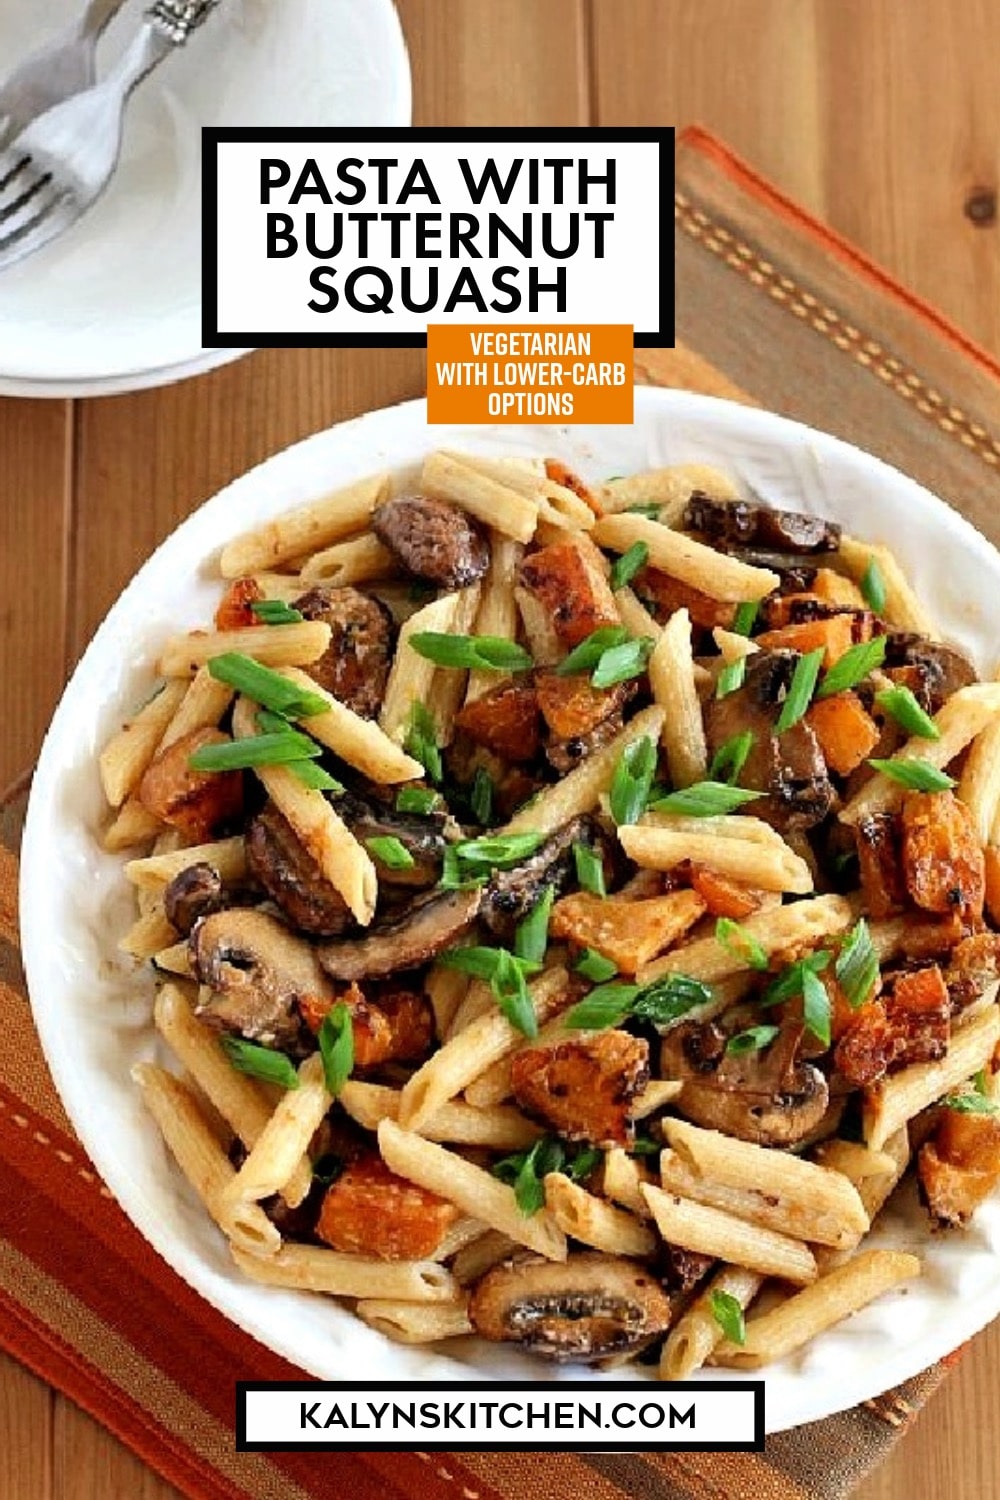 Pinterest image of Pasta with Butternut Squash